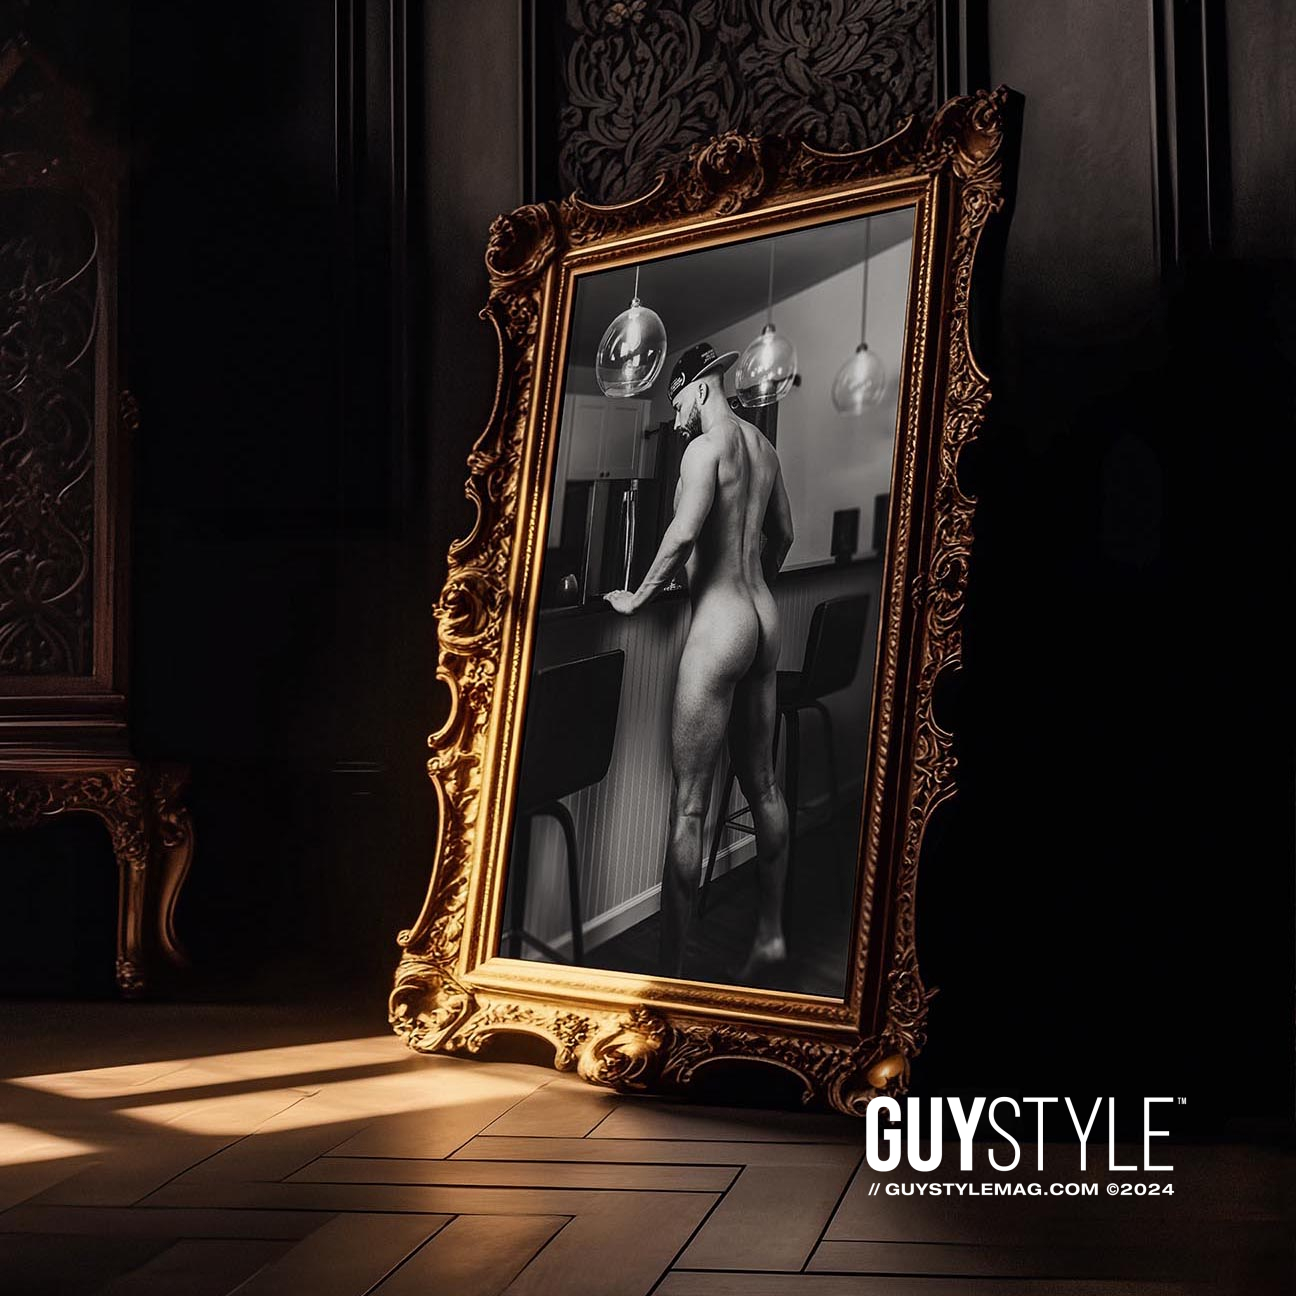 GUY STYE MAG Call for Submissions: Male Boudoir Photography and Homoerotic Art – Submit Your Photography Work Today at guystylemag.com/submit